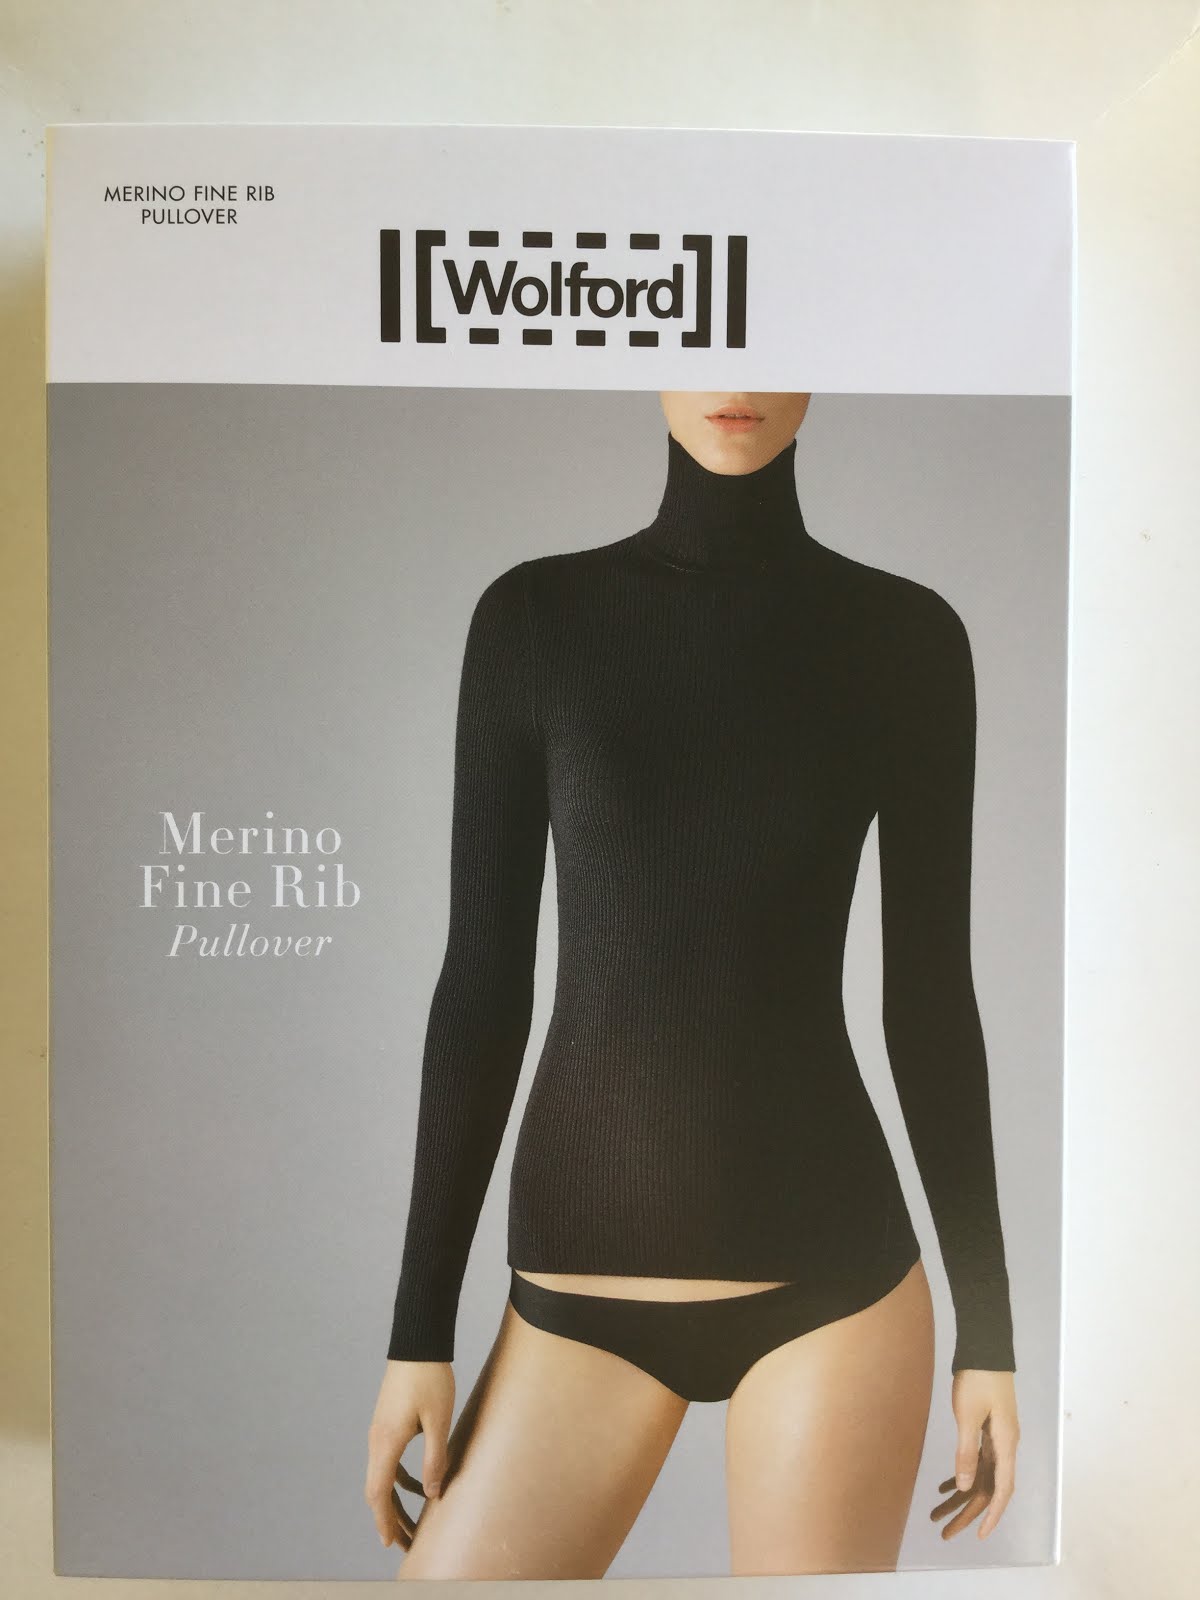 Hosiery For Men: Just arrived from Wolford: Merino Fine Rib Pullover